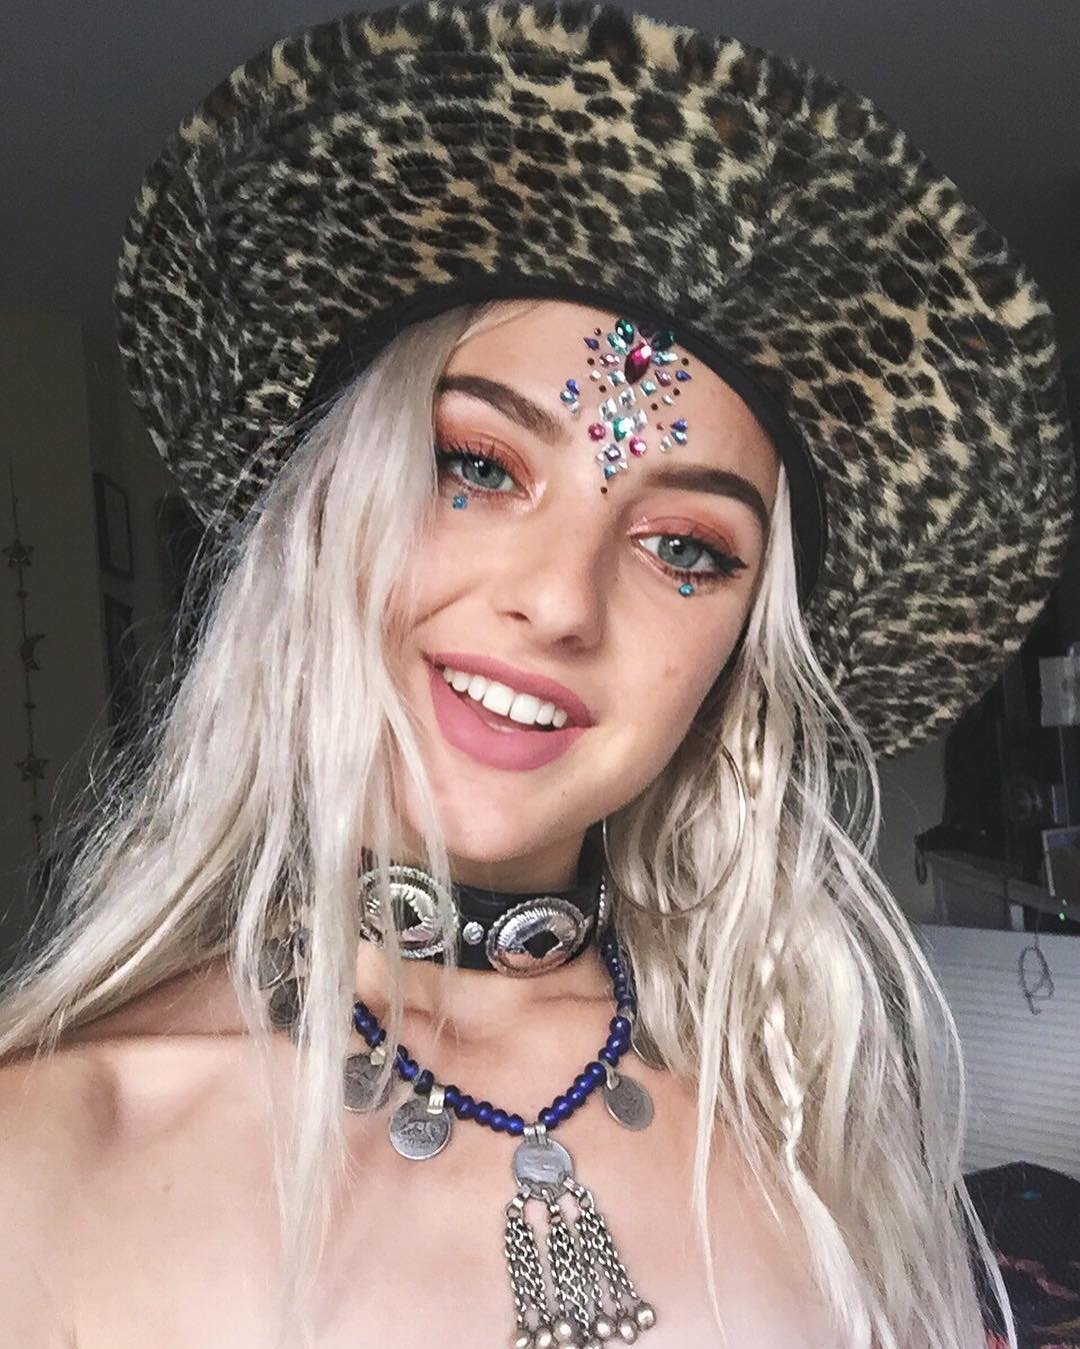 6 Sets Women Mermaid Face Gems Glitter,Rhinestone Rave Festival Face Jewels,Crystals Face Stickers, Eyes Face Body Temporary Tattoos